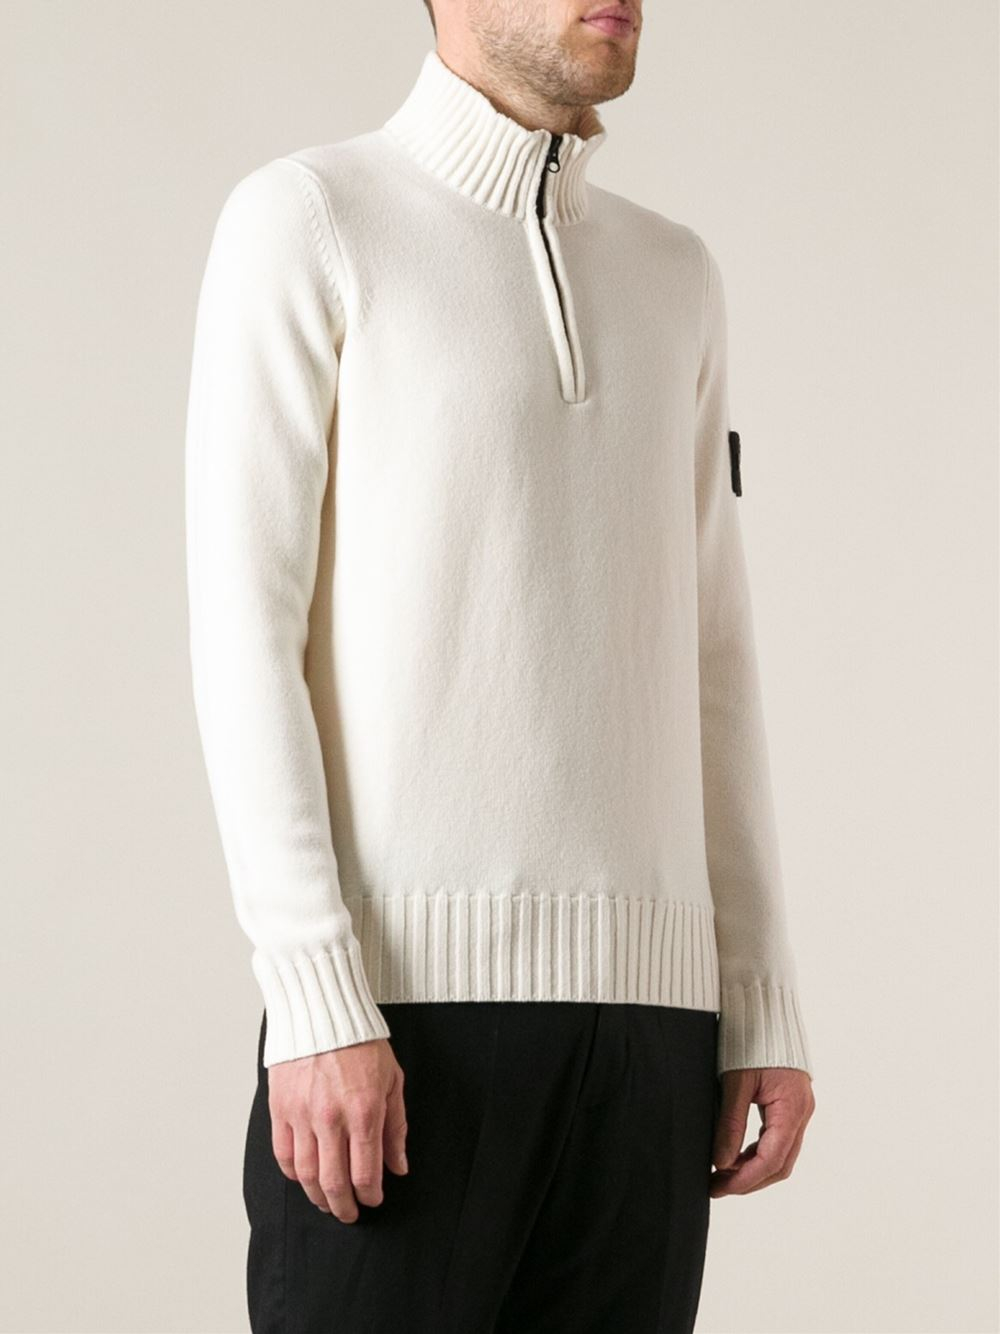 Lyst - Stone Island Zipped High Neck Sweater in White for Men